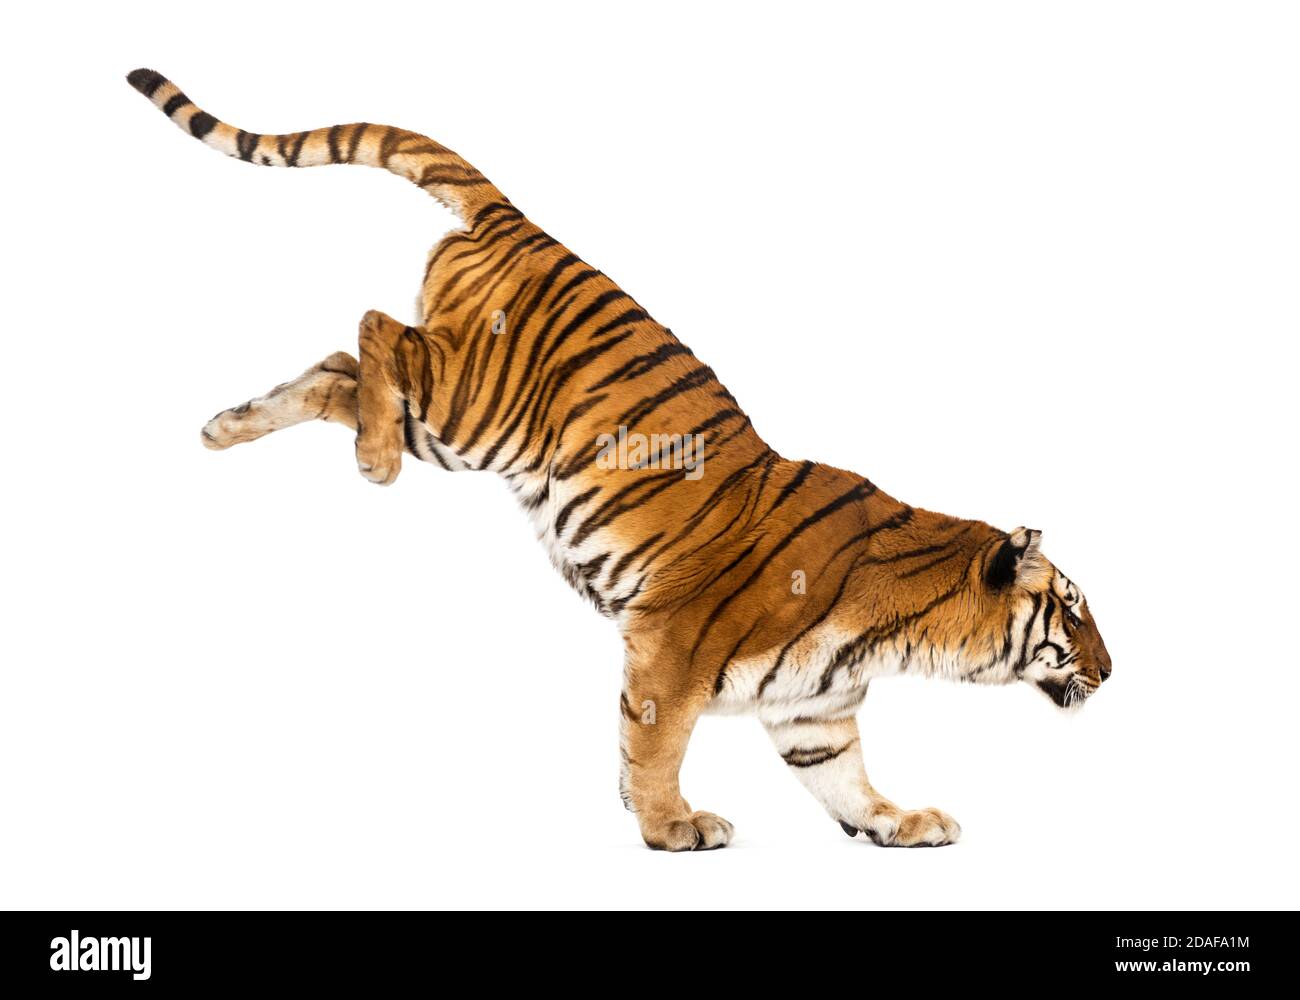 Tiger getting down a white box, isolated on white Stock Photo